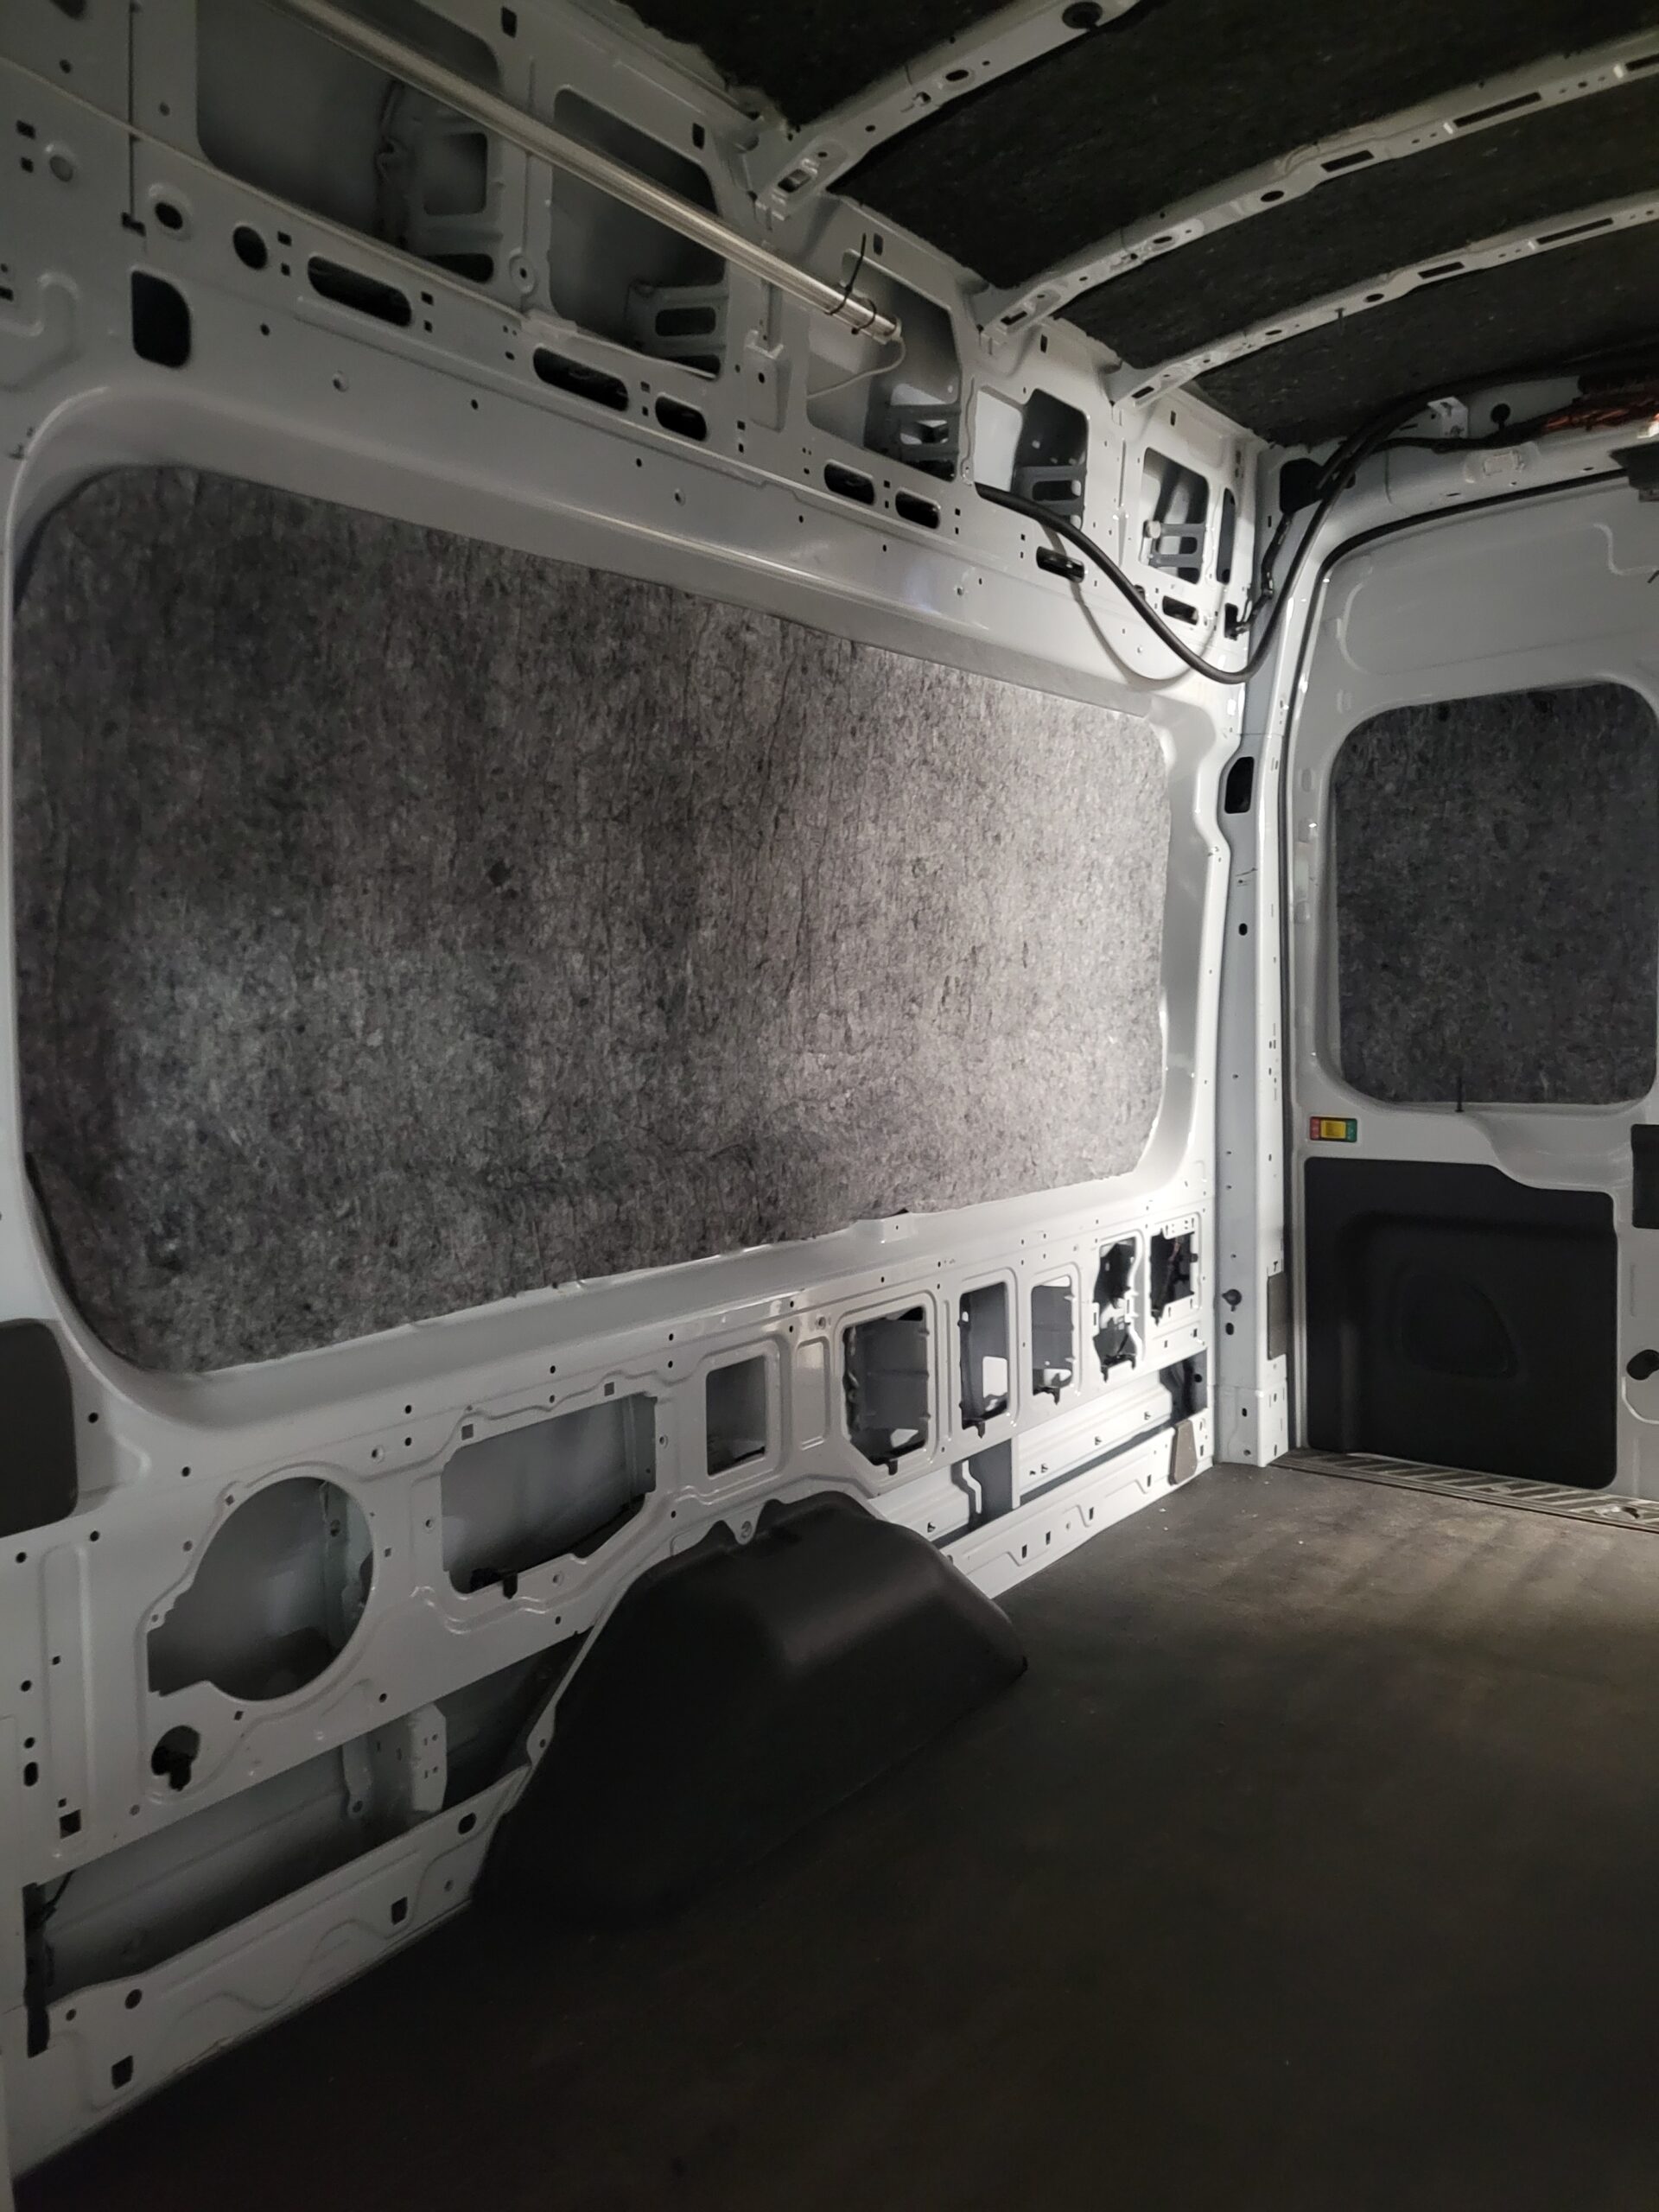 Ram Promaster Insulation Package